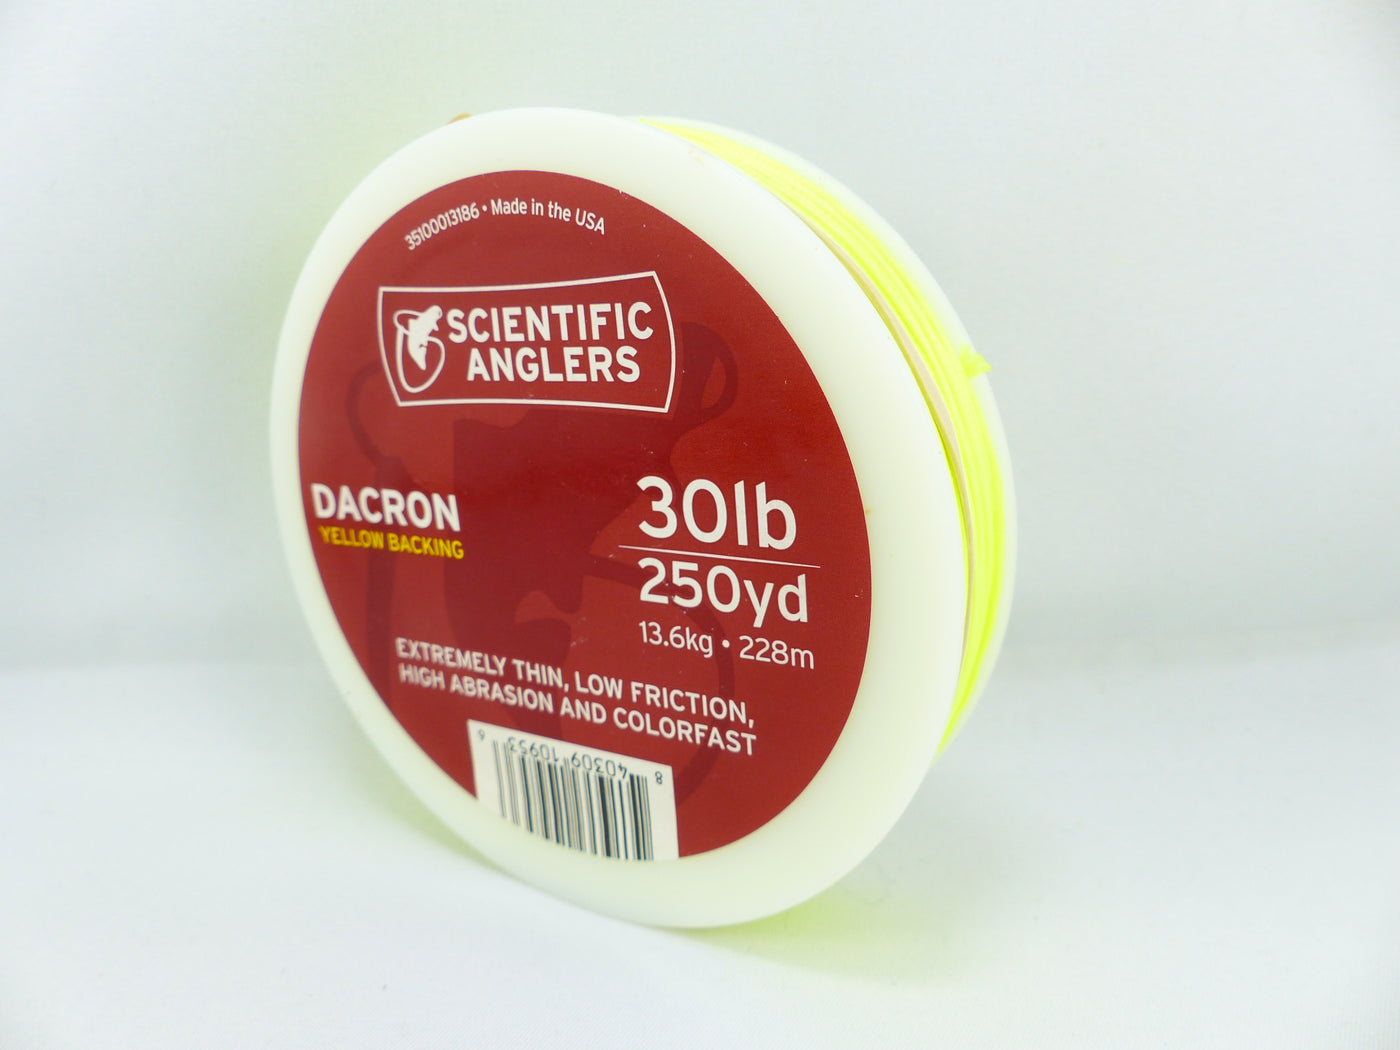 Backing scientific anglers Dacron 250 VGS